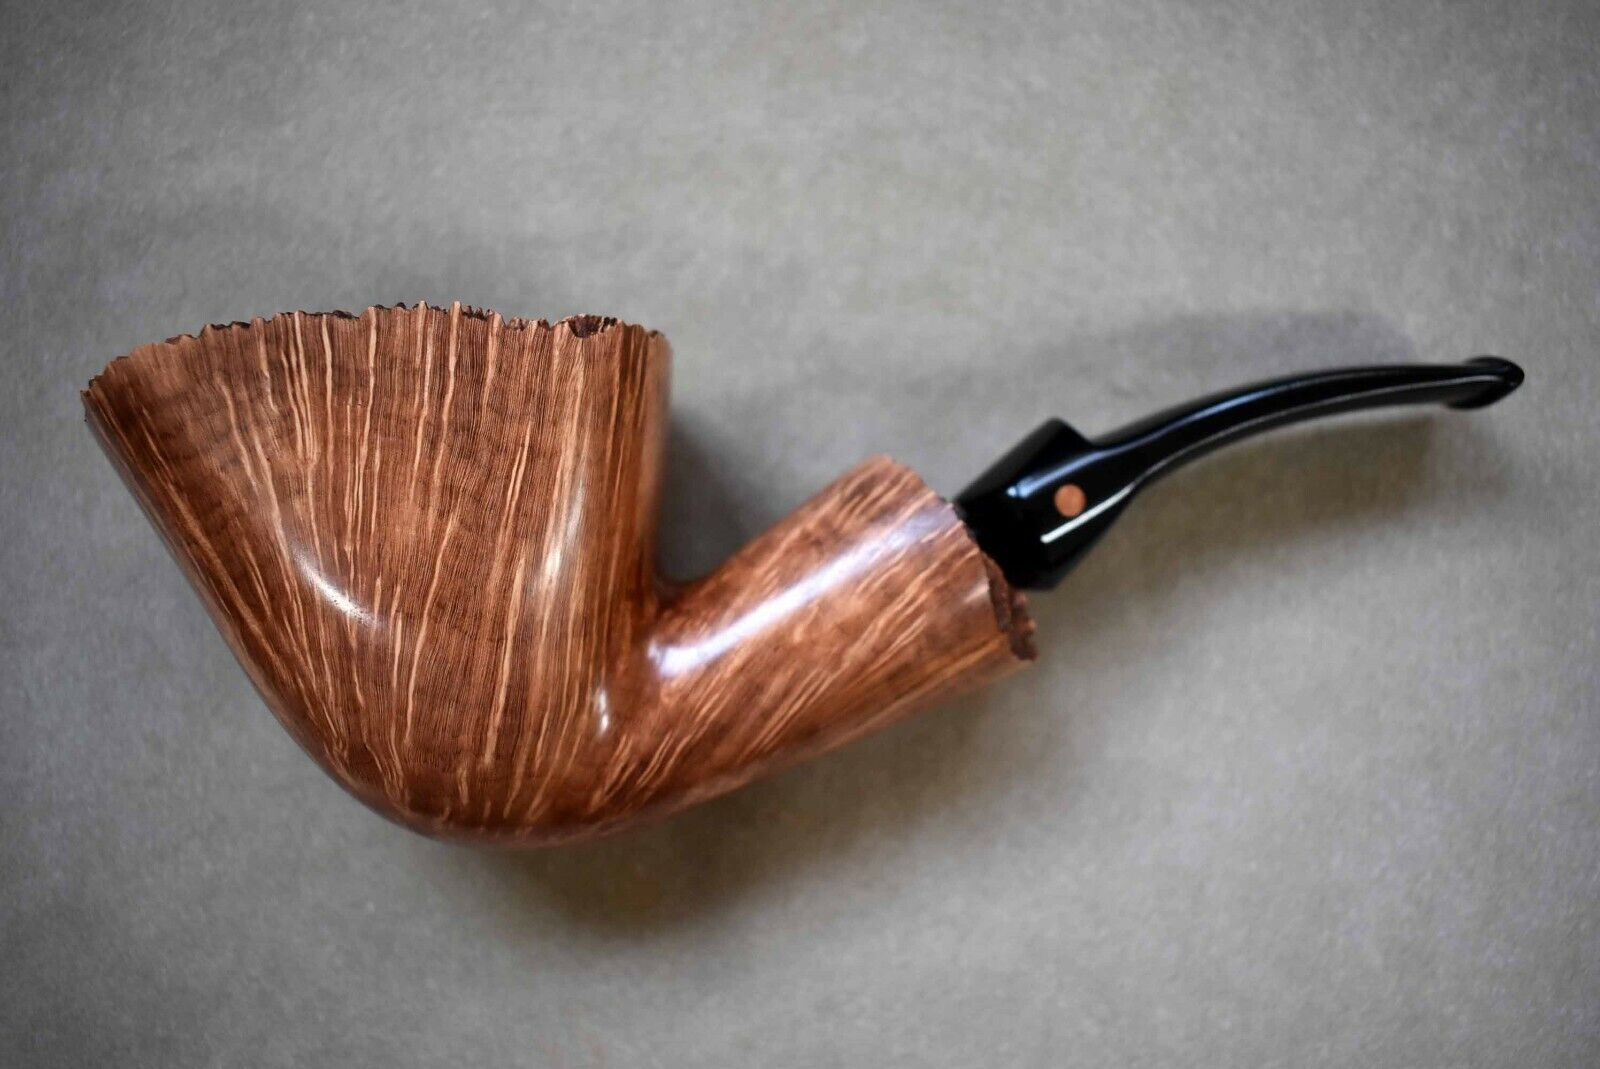 Moretti Pipe Emblem Collection Marco Biagini Super Magnum Freehand Natural Top